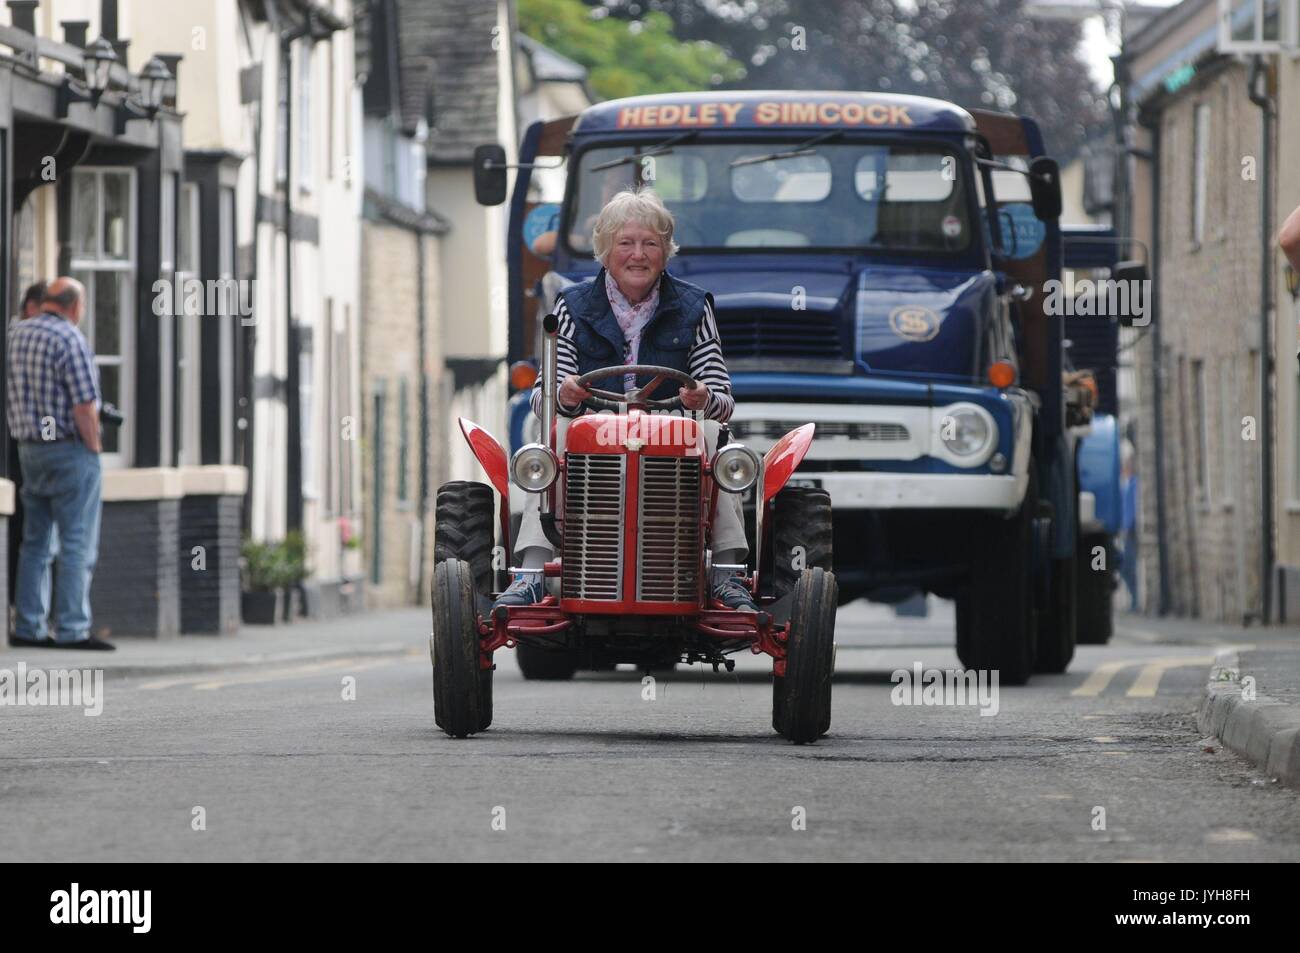 Kington, , UK. 20th Aug, 2017. The Herefordshire market town of Kington came to a standstill while a parade of vintage vehicles made their way to the Kington Vintage Club's 25th Annual Show. A miniature tractor makes its way up Duke Street followed by a Hedley Simcock coal lorry. Credit: Andrew Compton/Alamy Live News Stock Photo